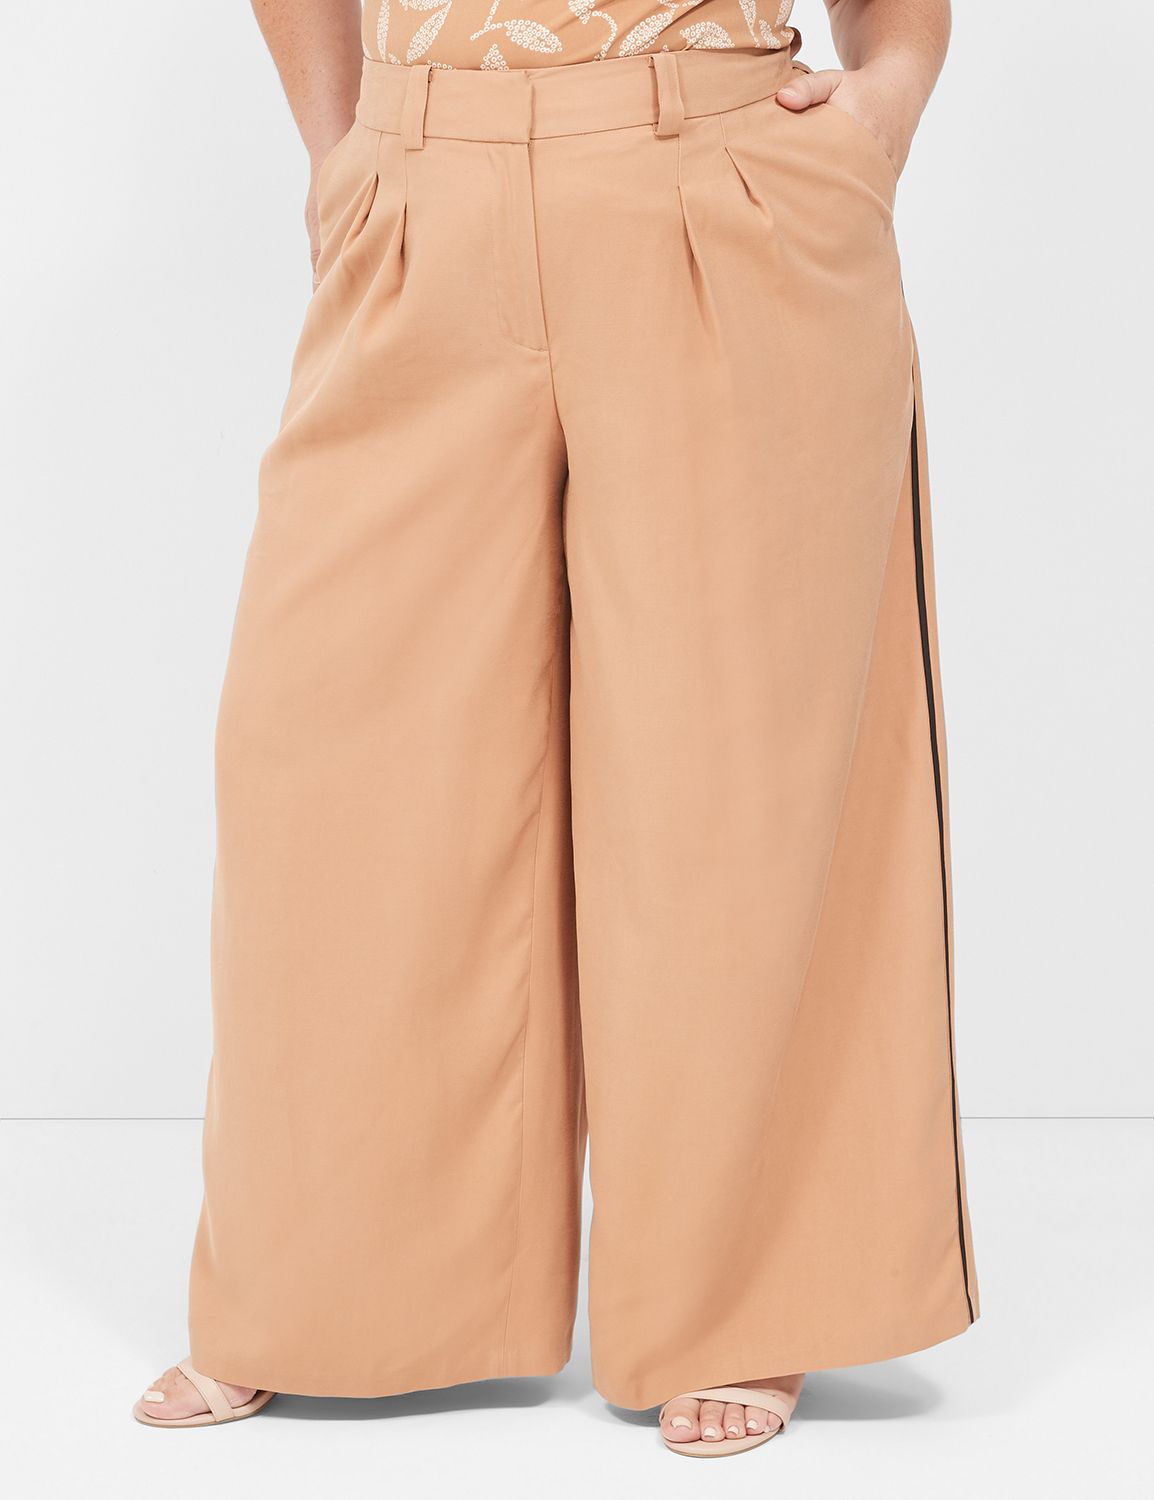 Plus Size High Waisted Wide Leg Trousers